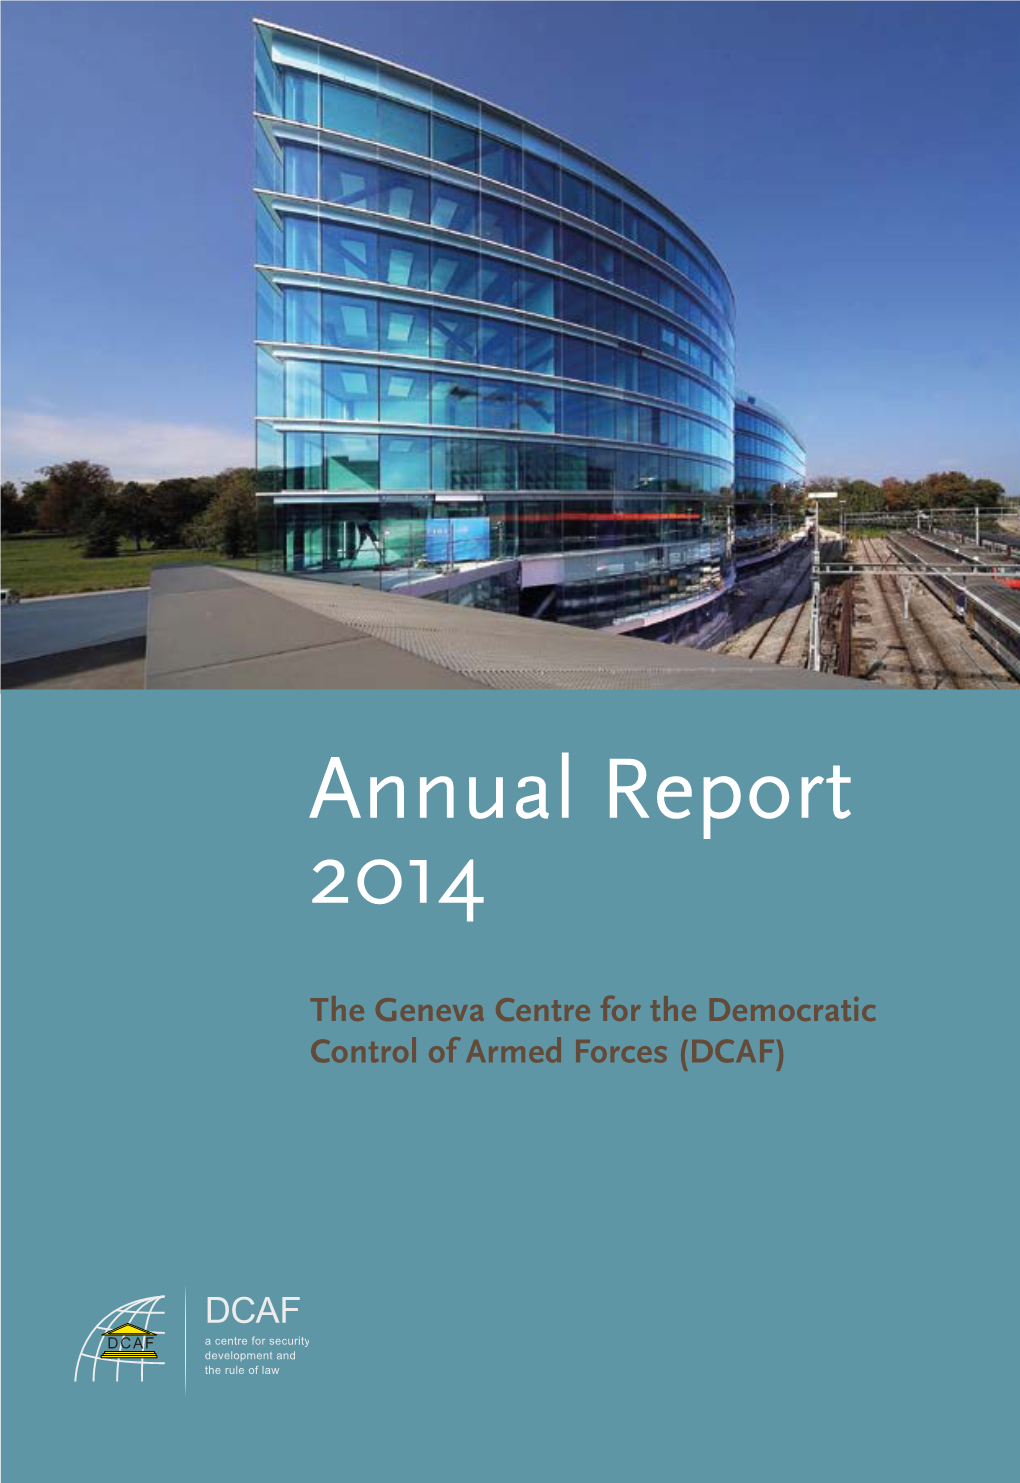 ONLINE-DCAF-Annual-Report-2014.Pdf